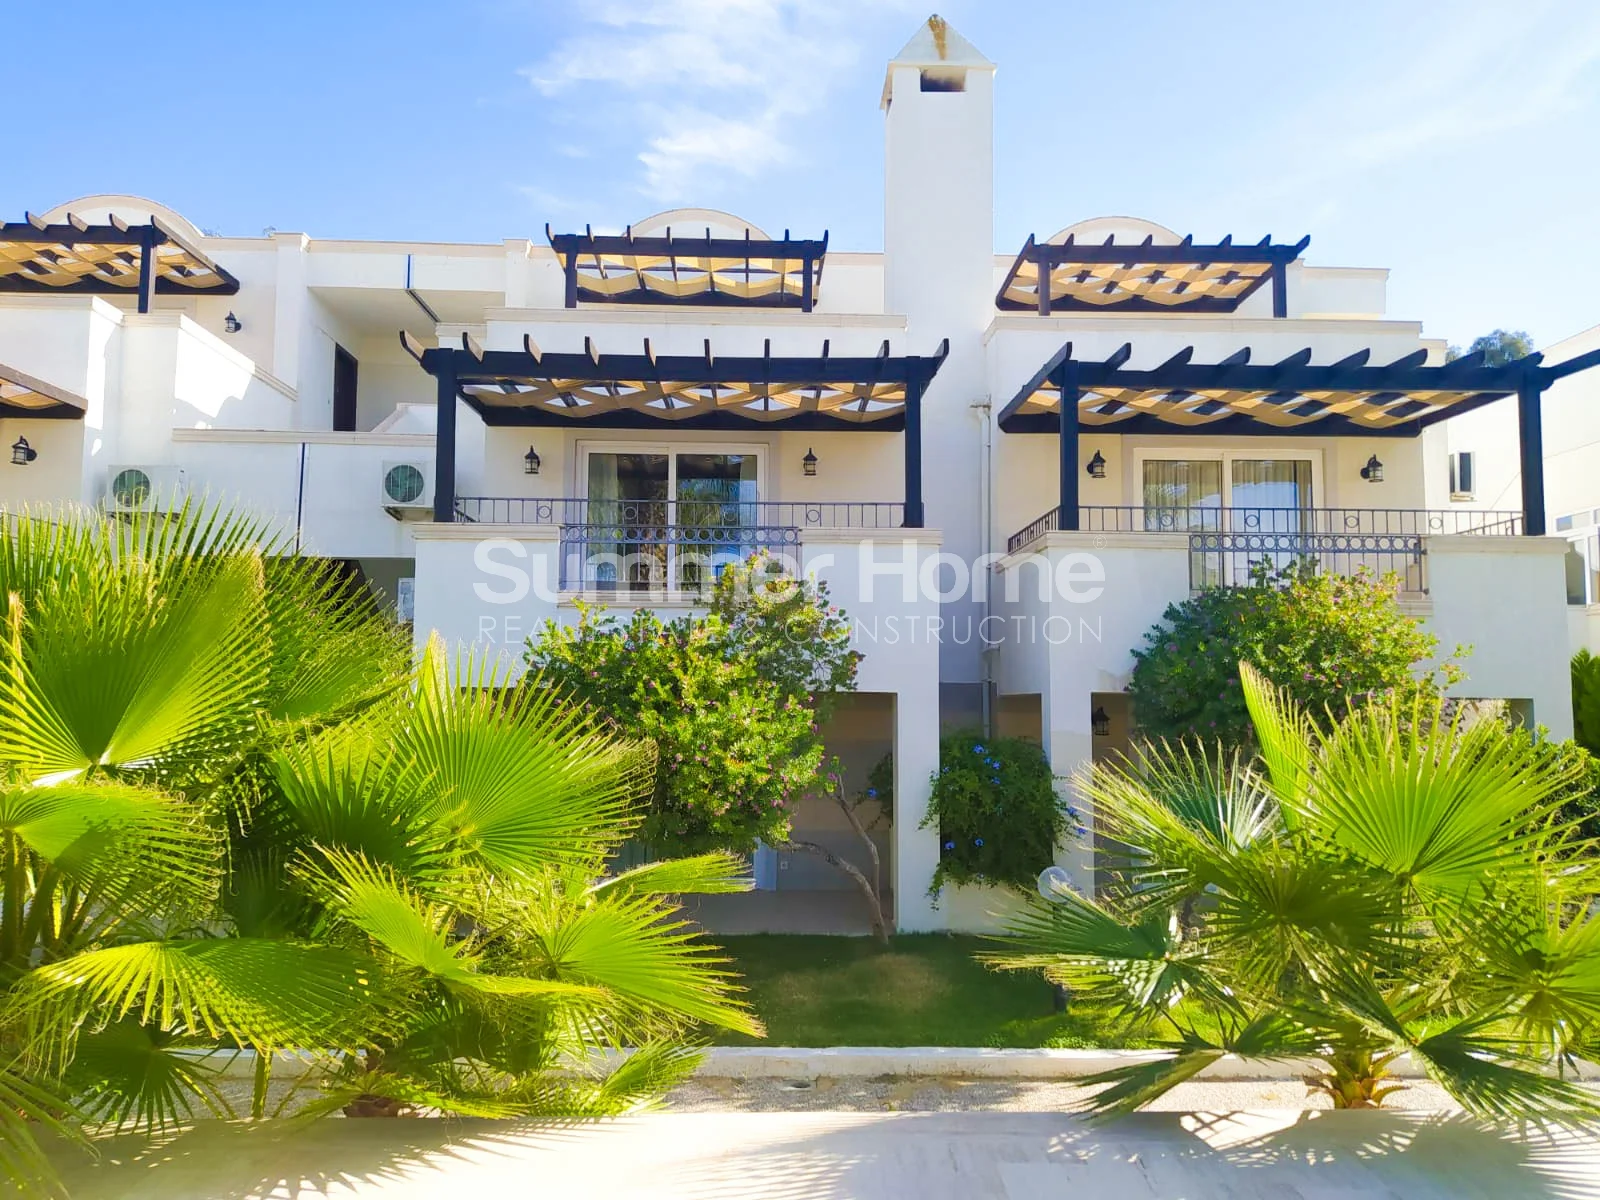 Apartments for sale by the seafront in Gumusluk, Bodrum general - 2